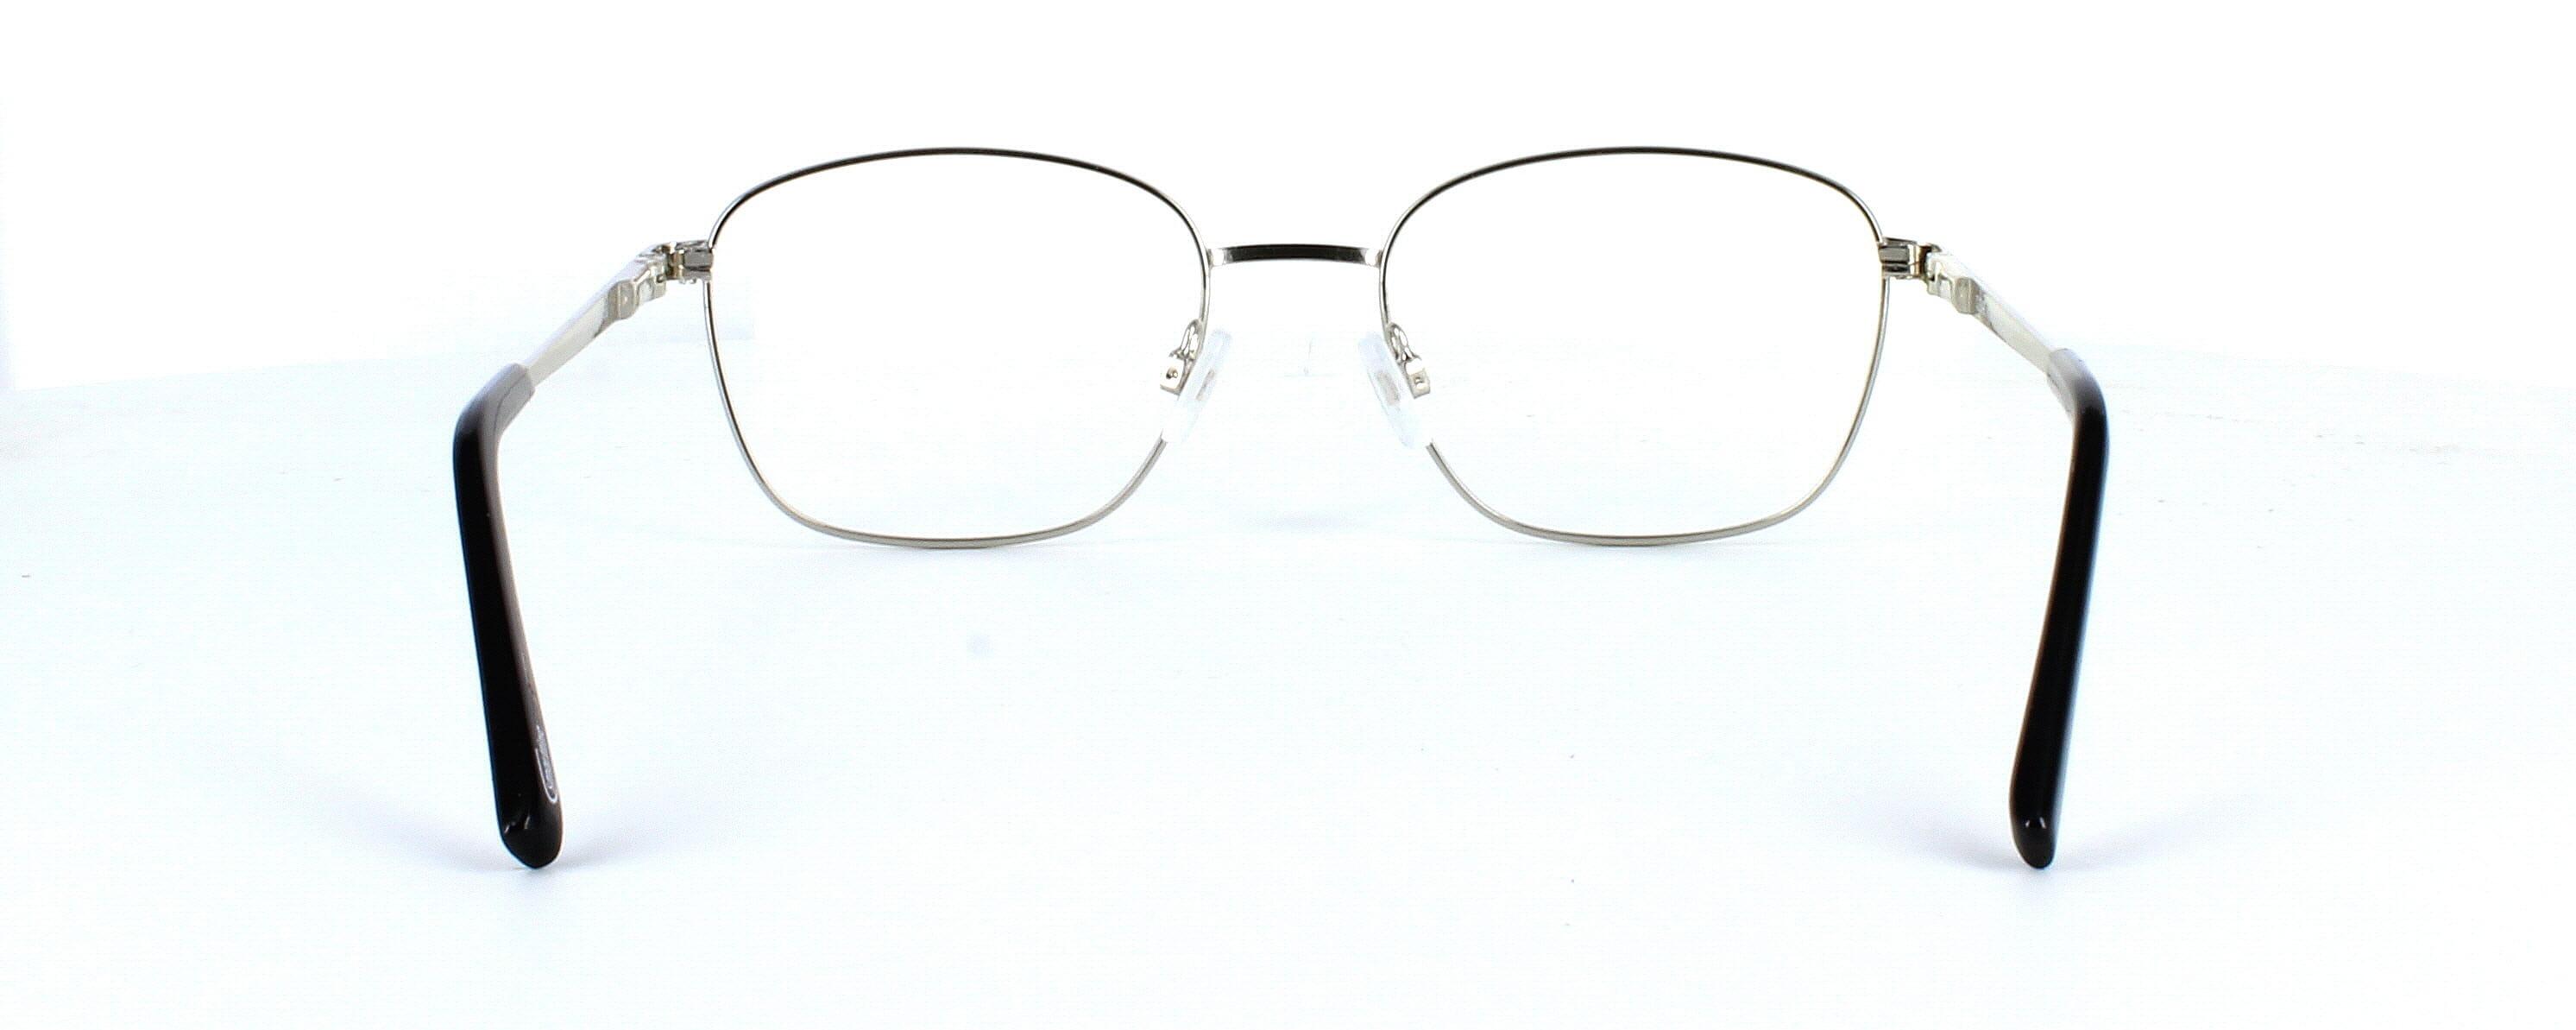 Blanko - Unisex shiny silver metal square shaped glasses with sprung hinge temple - image view 4